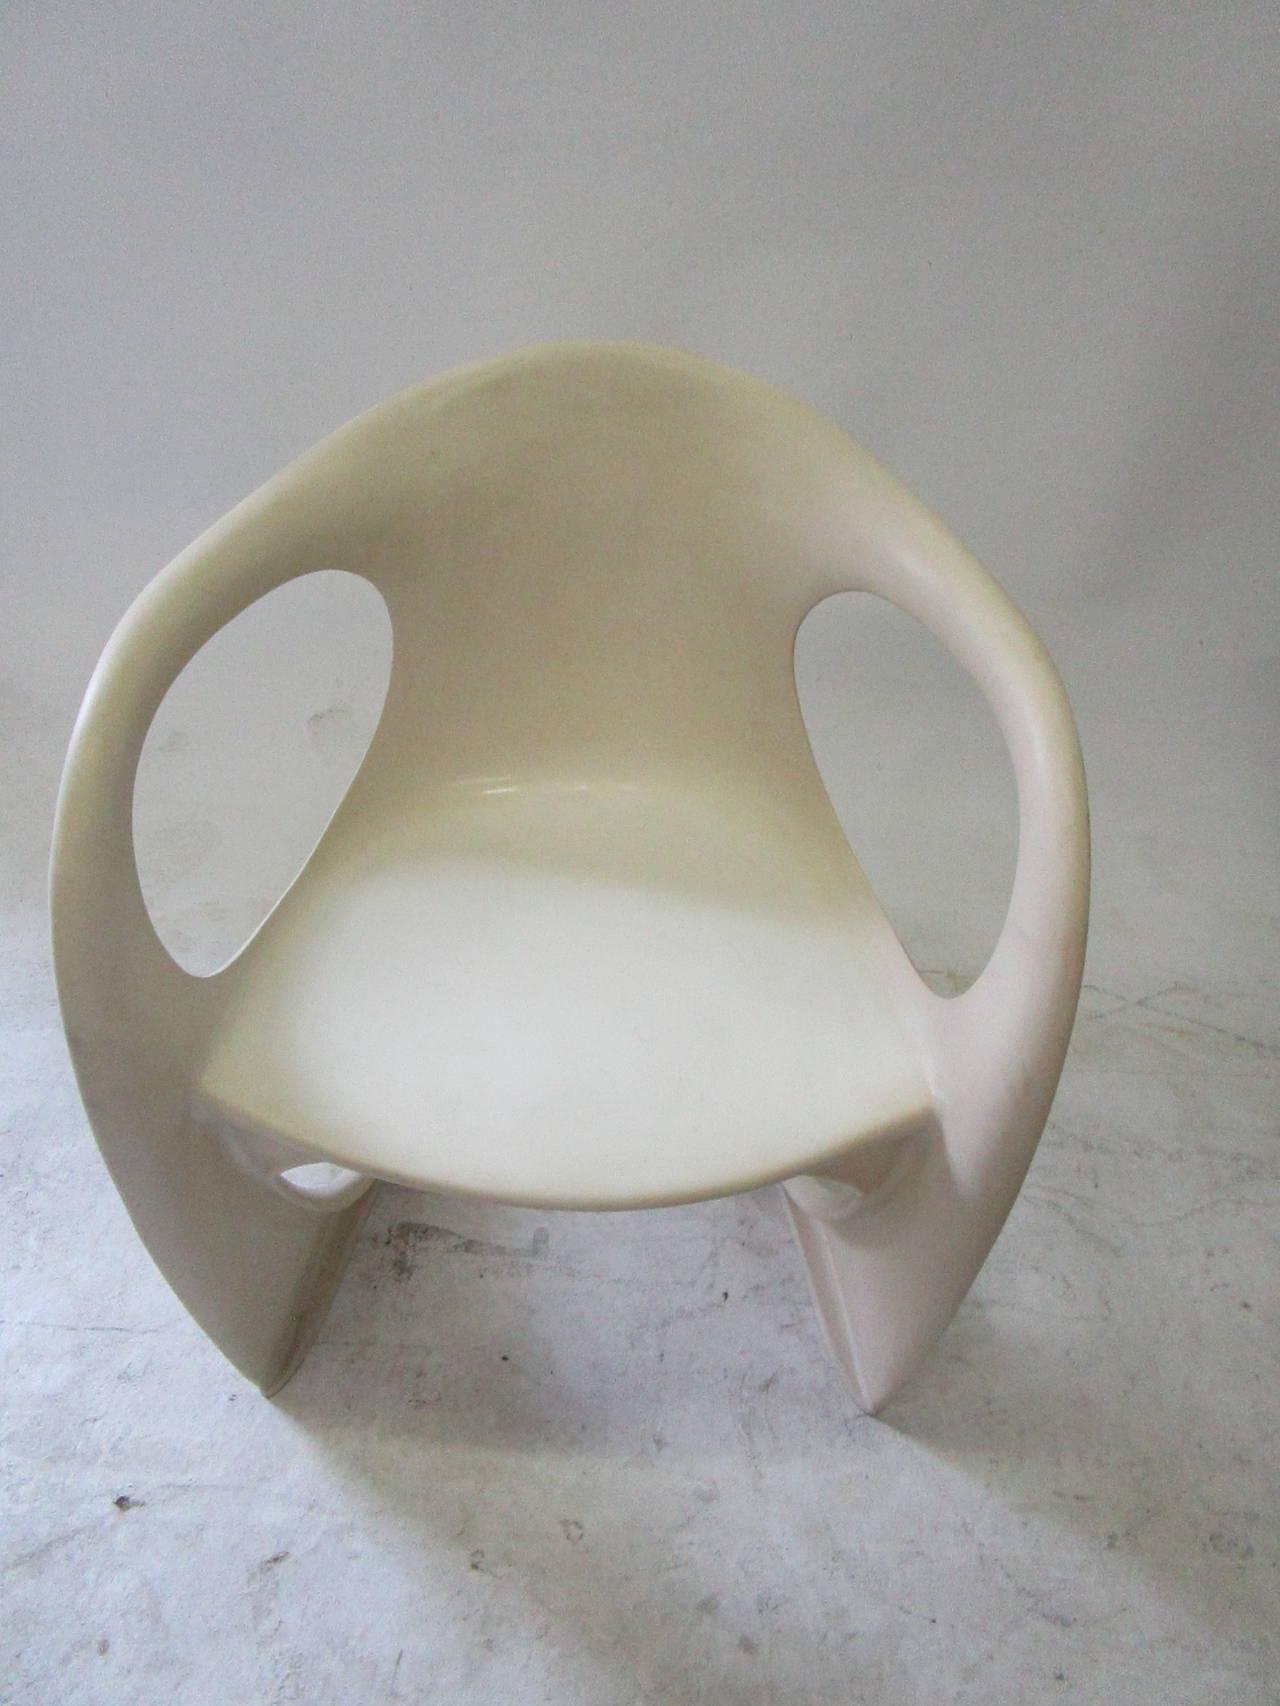 This indoor or outdoor chair is an original one by Ostergaard Steen. An accomplished furniture designer, inventor and architect, he was born in Denmark in 1935 and now resides in France. His exhibits are in France, Germany and Denmark He was